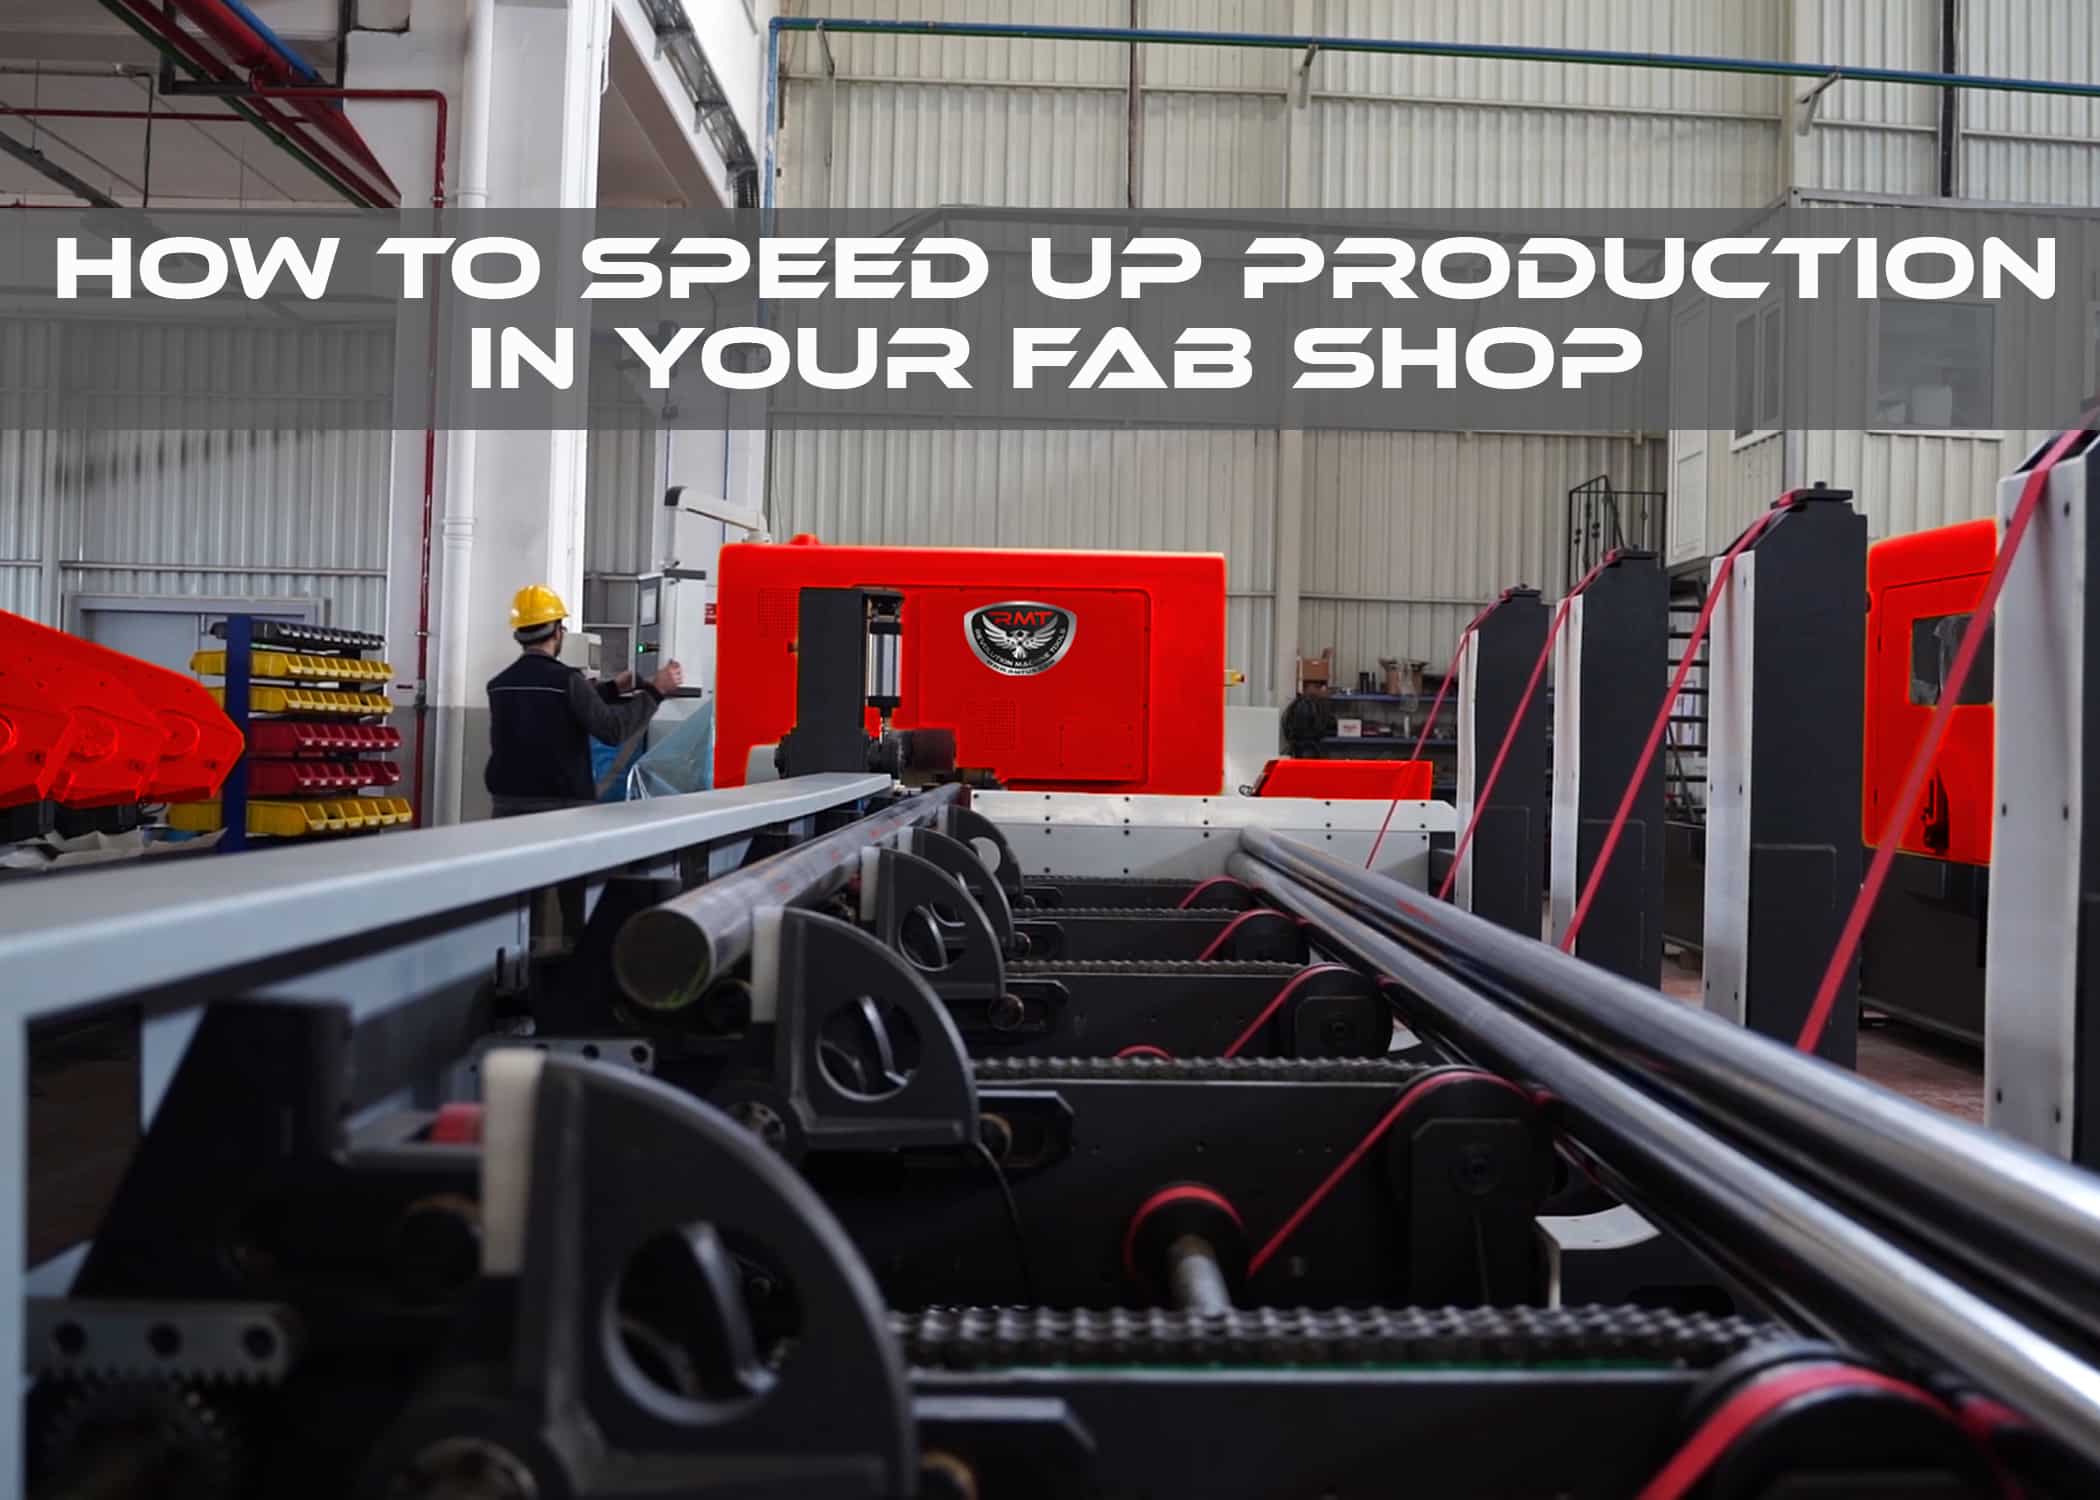 How to Speed Up Production in Your Fab Shop